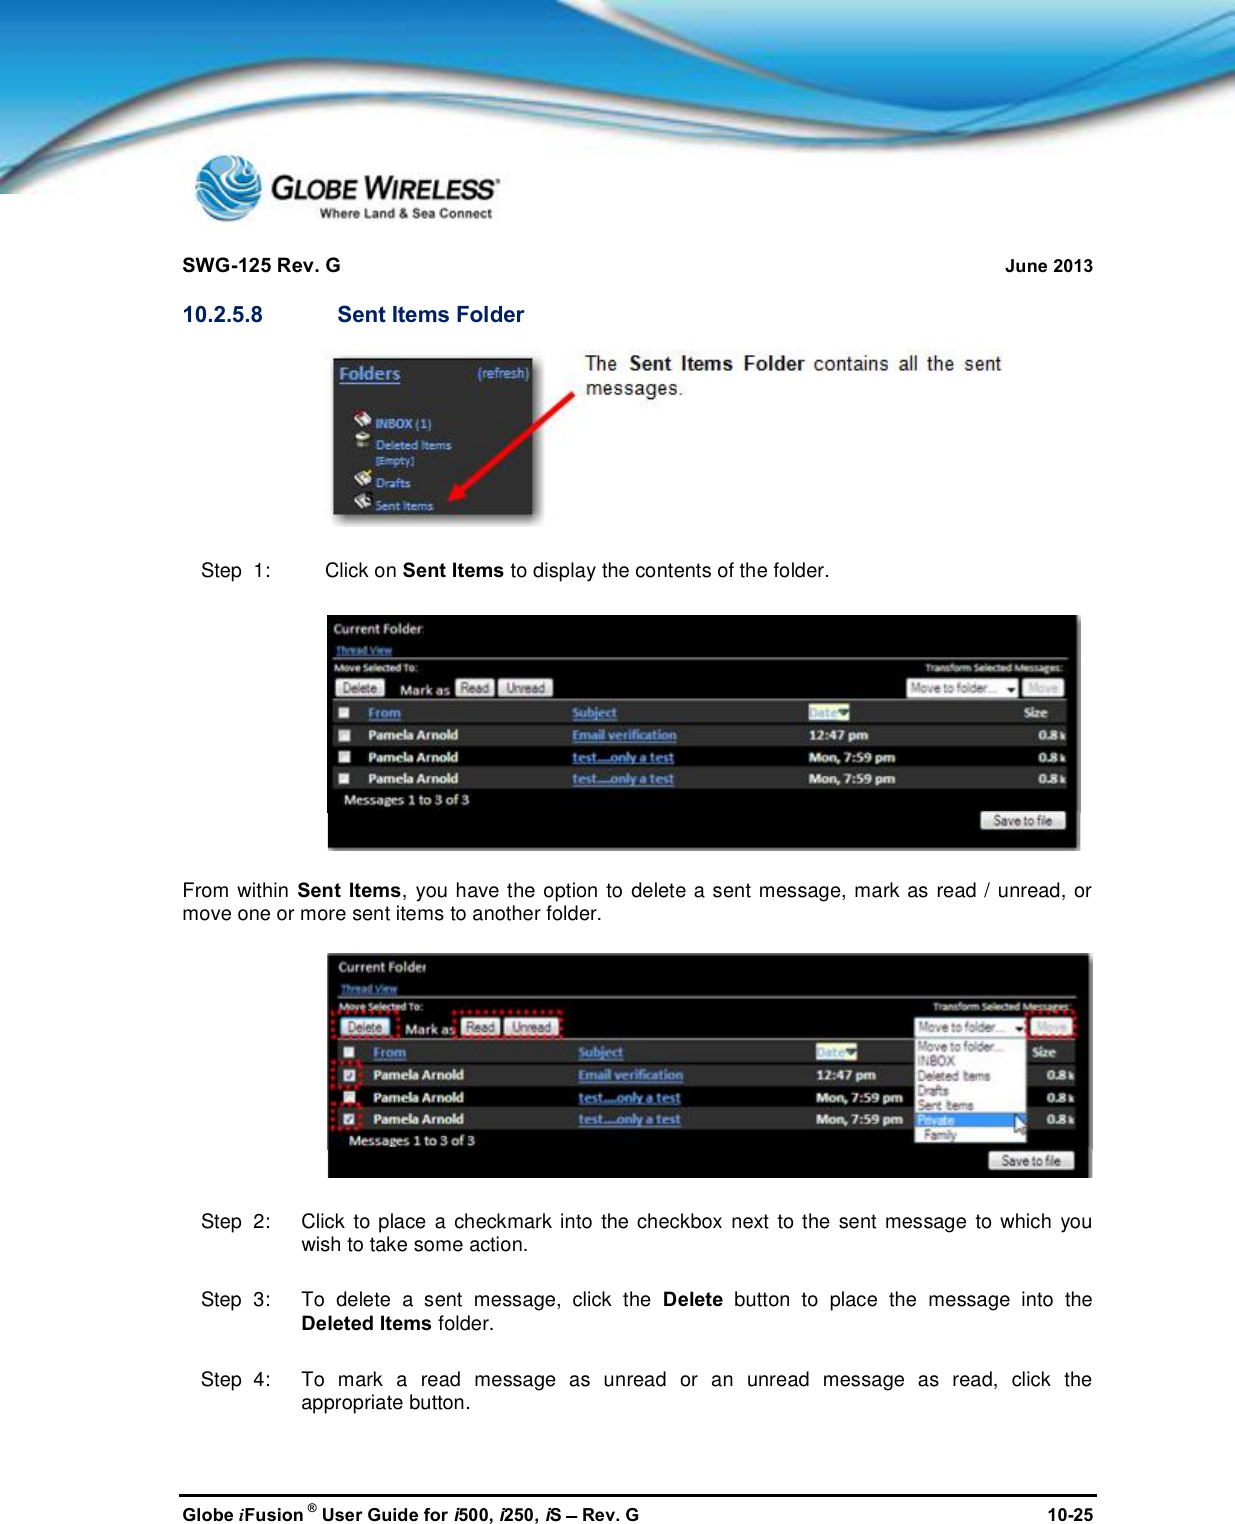 SWG-125 Rev. G June 2013Globe iFusion ®User Guide for i500, i250, iSRev. G 10-2510.2.5.8 Sent Items FolderStep  1: Click on Sent Items to display the contents of the folder.From within Sent Items, you have the option to delete a sent message, mark as read / unread, ormove one or more sent items to another folder.Step  2:   Click to place a checkmark into the checkbox next to the sent message to which youwish to take some action.Step  3:   To delete a sent message, click the Delete button to place the message into theDeleted Items folder.Step  4:   To mark a read message as unread or an unread message as read, click theappropriate button.